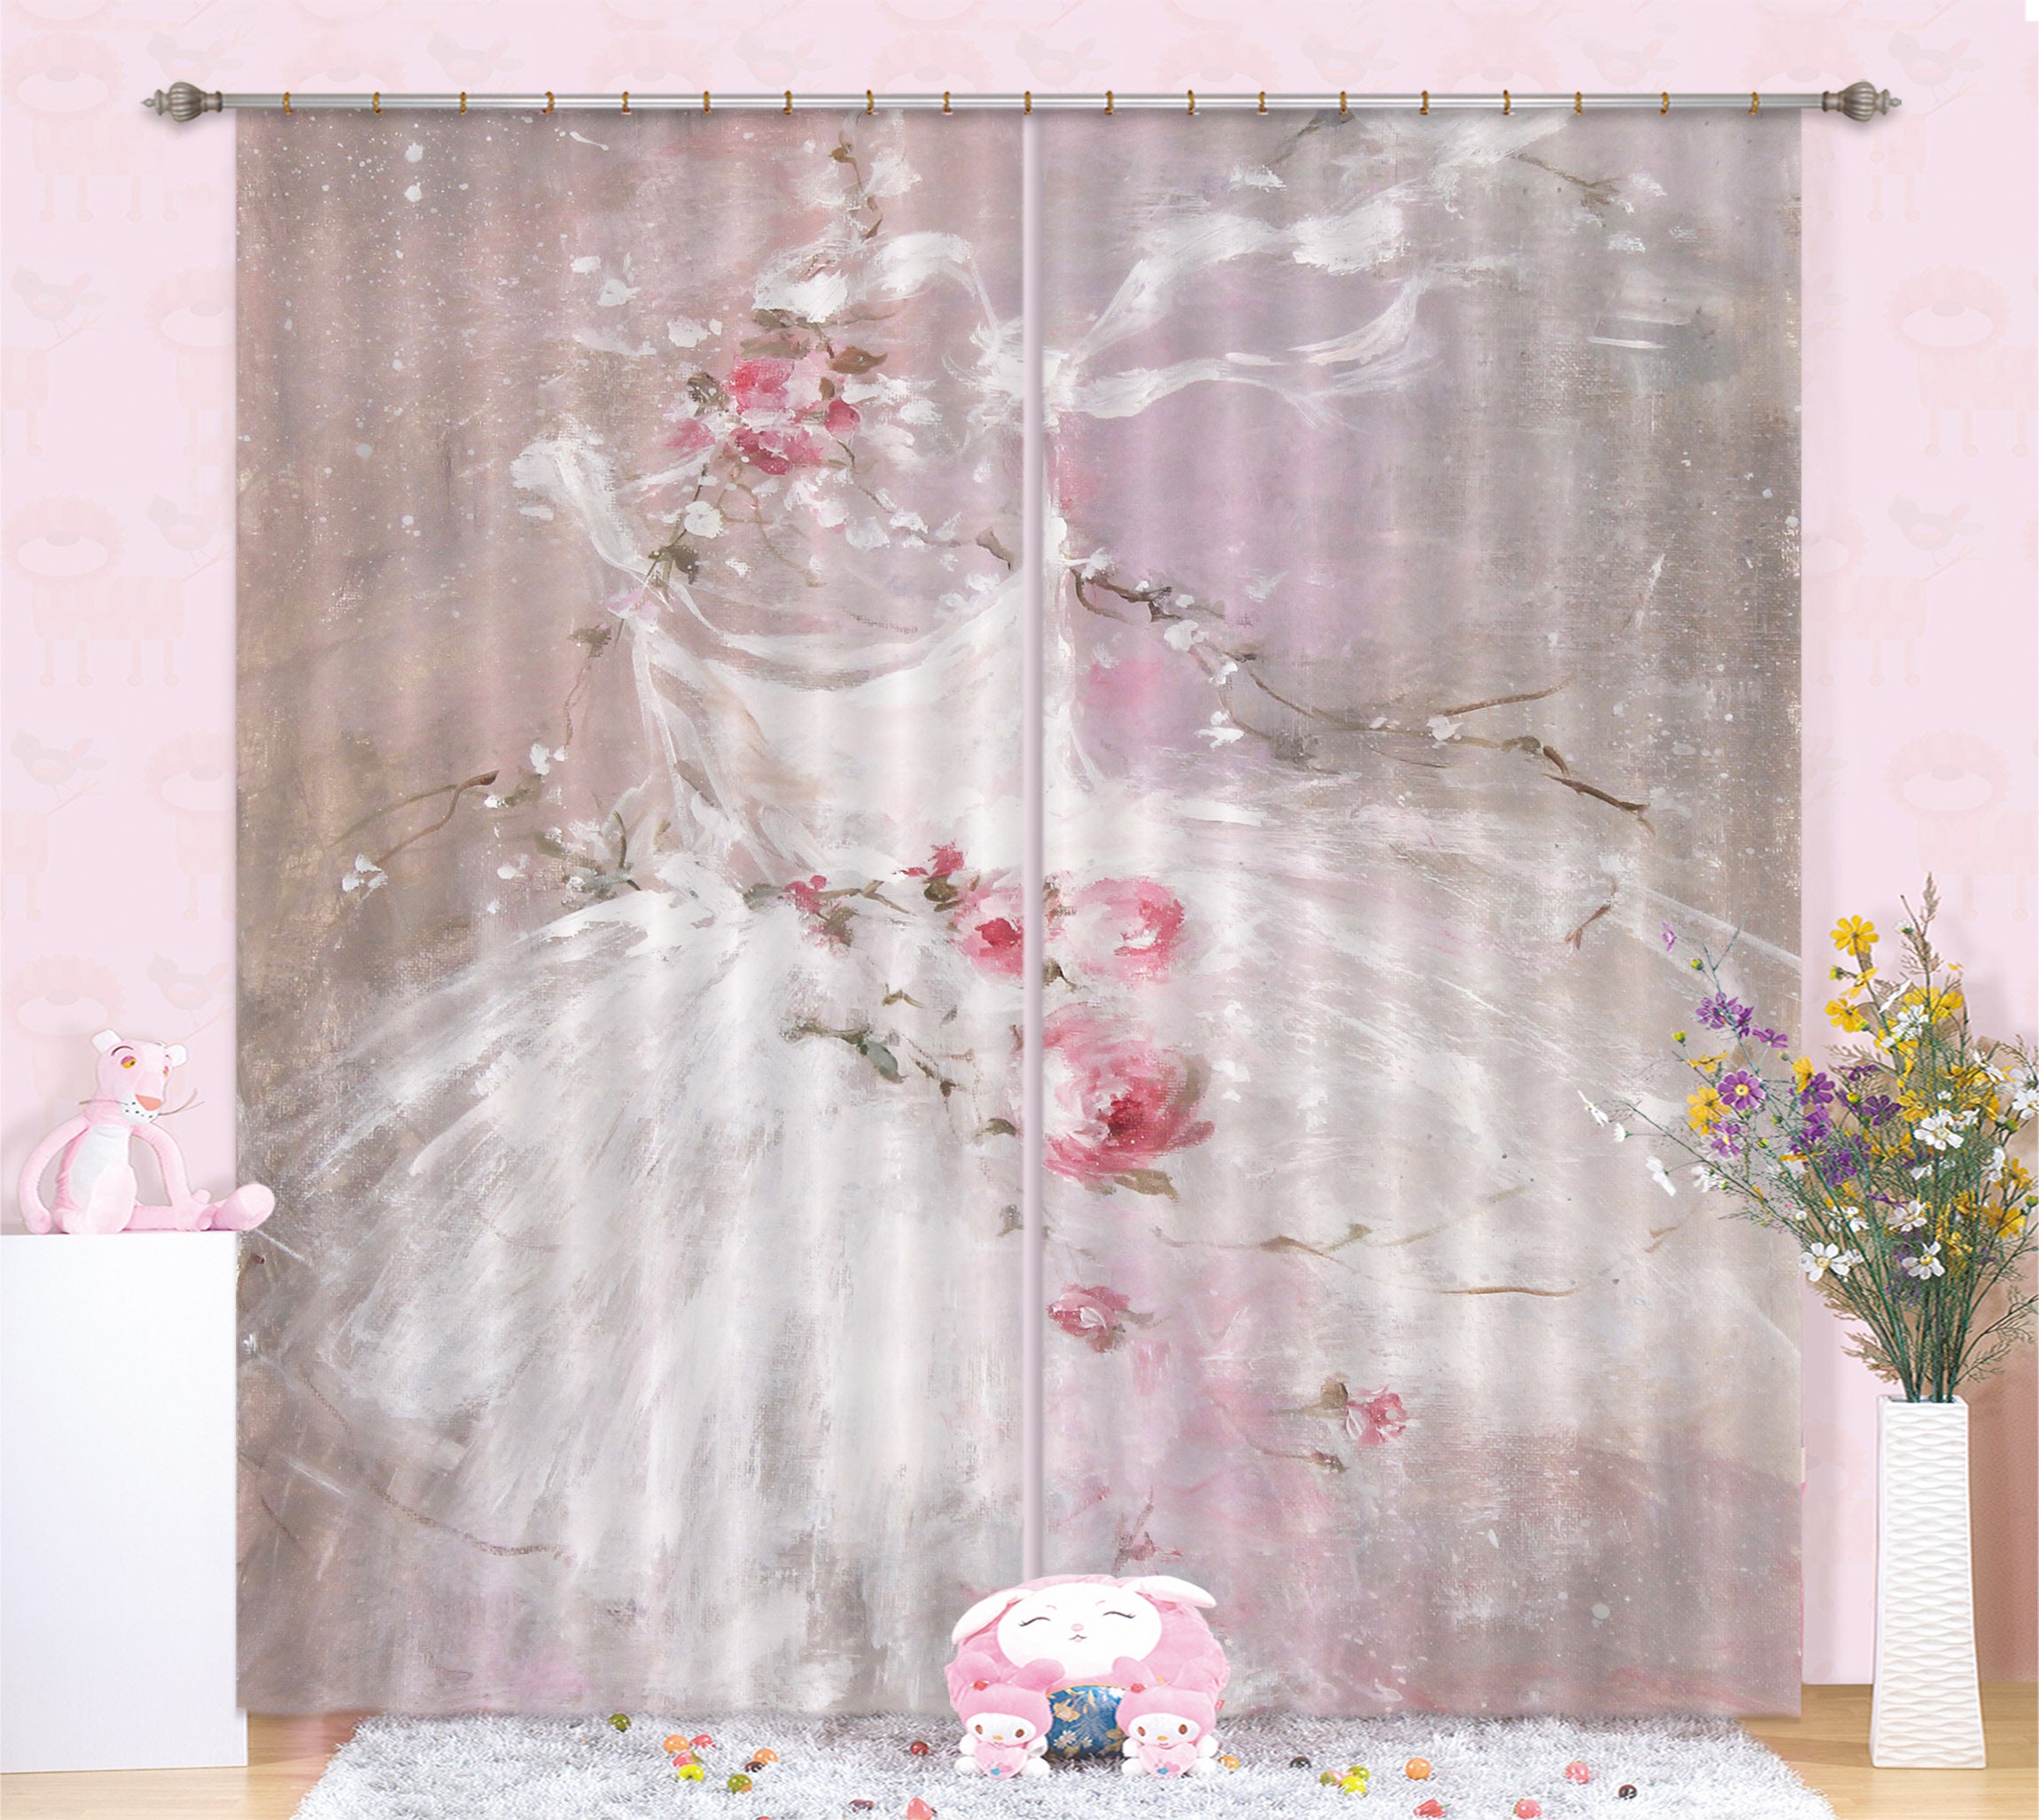 3D Pink Wedding Dress 037 Debi Coules Curtain Curtains Drapes